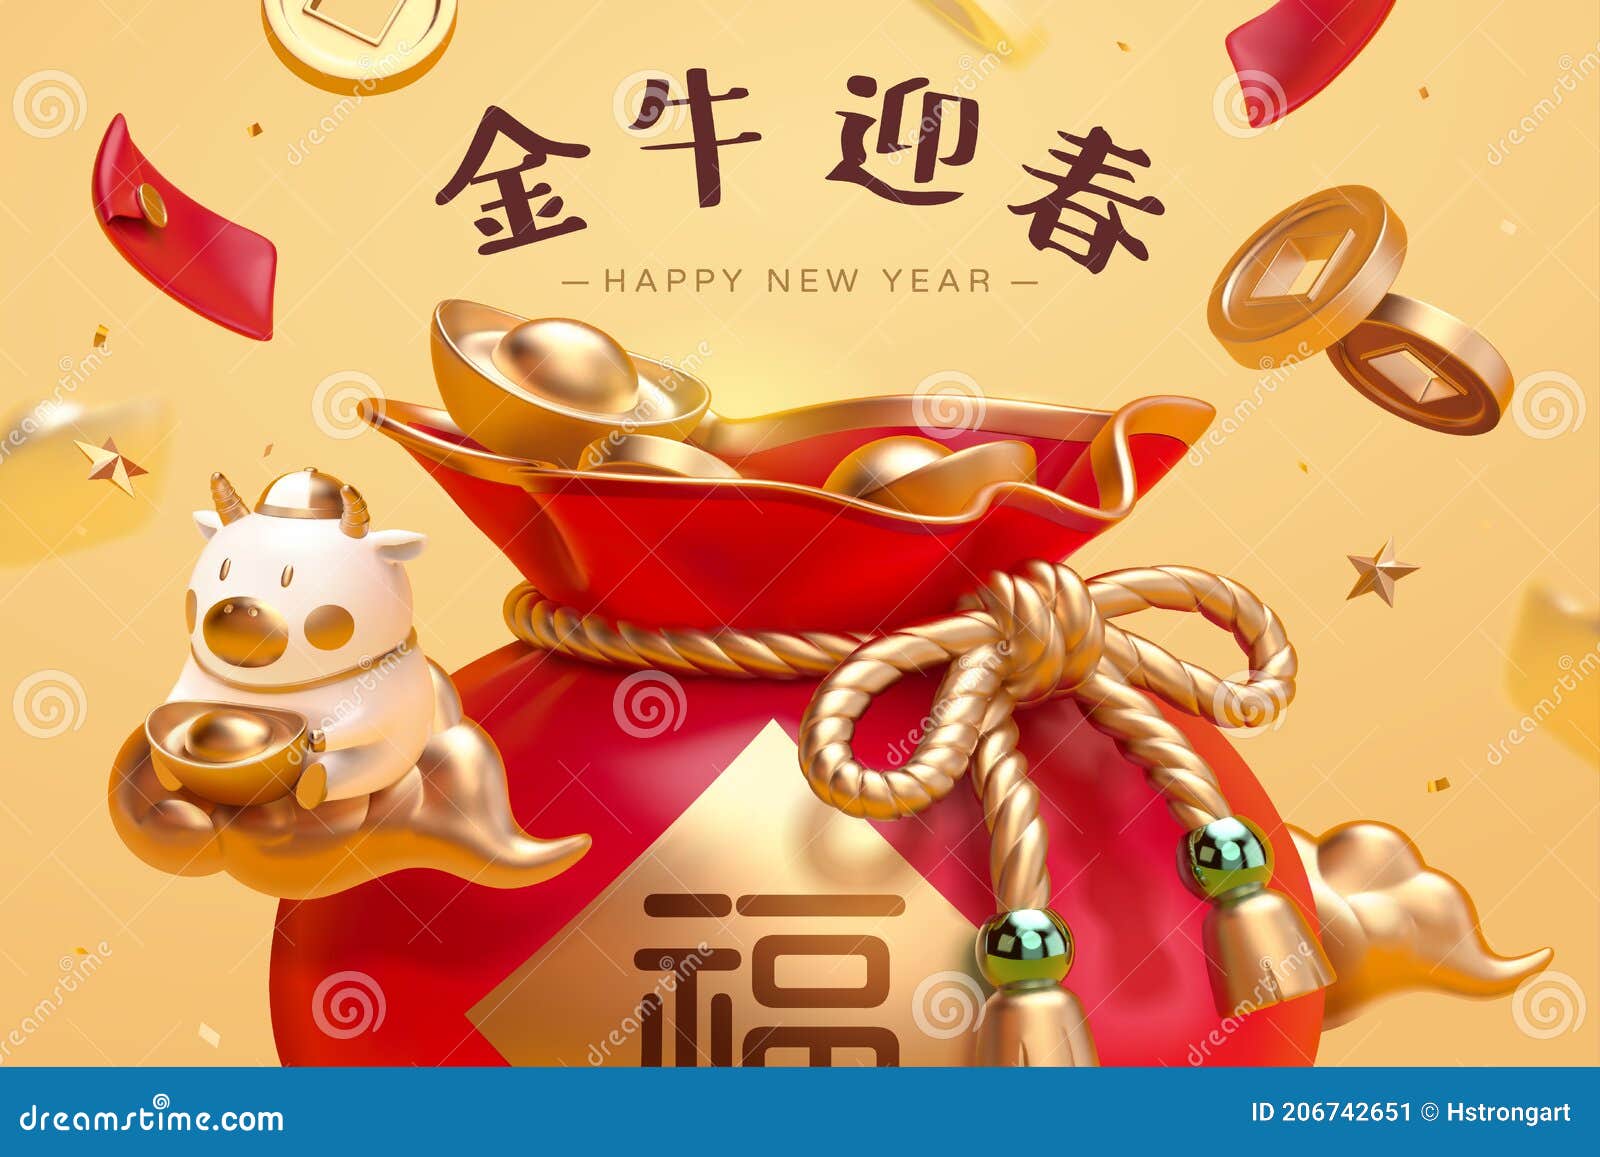 Chinese new year 2020 lucky envelope money packet Vector Image